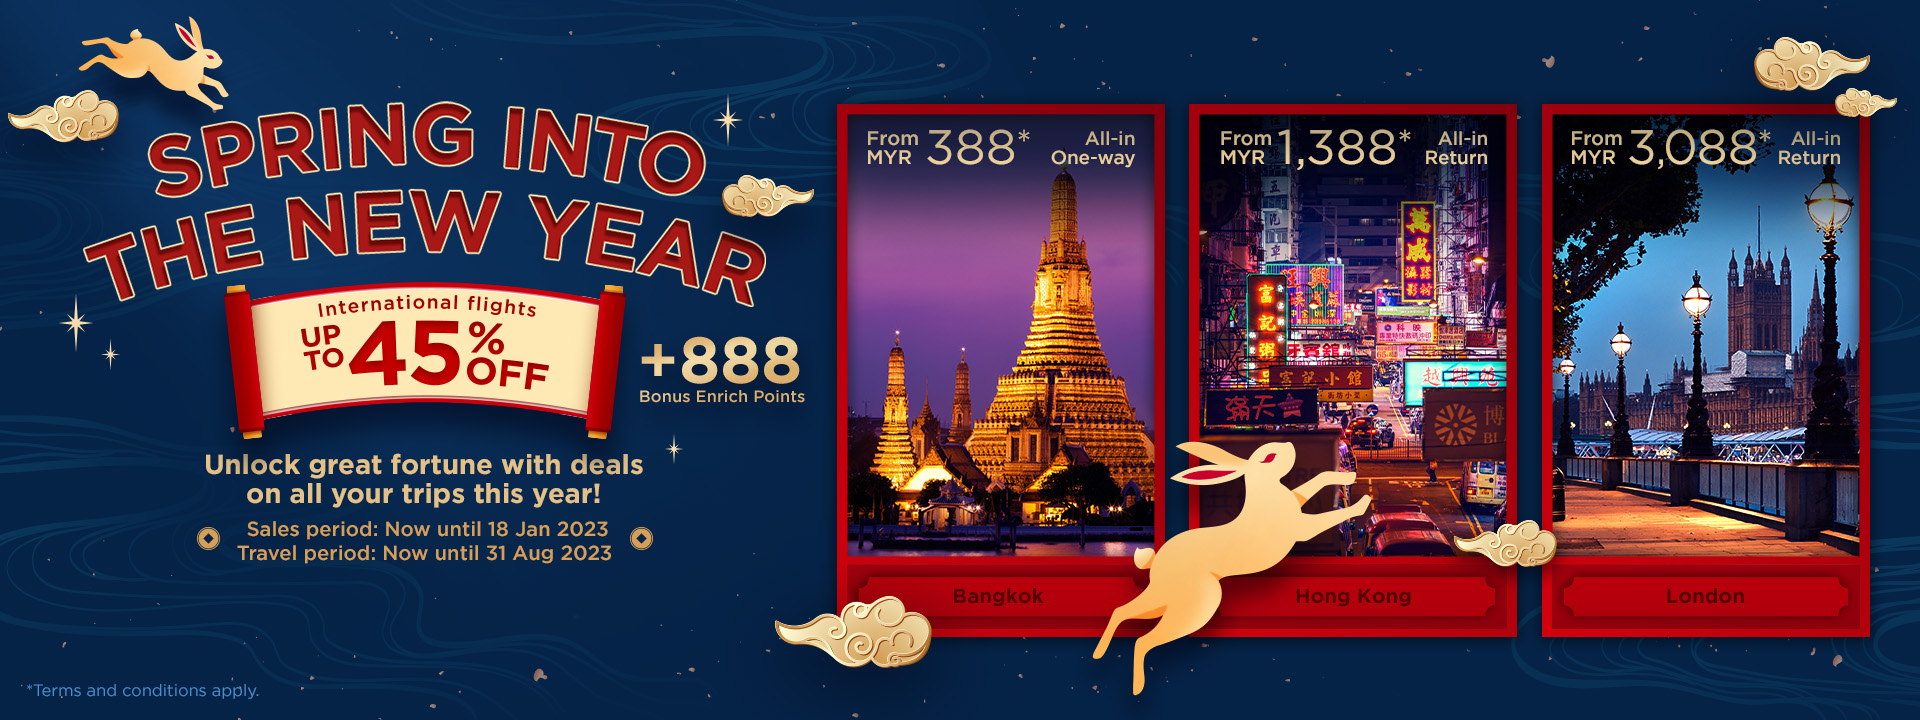 Malaysia airlines spring into new year banner